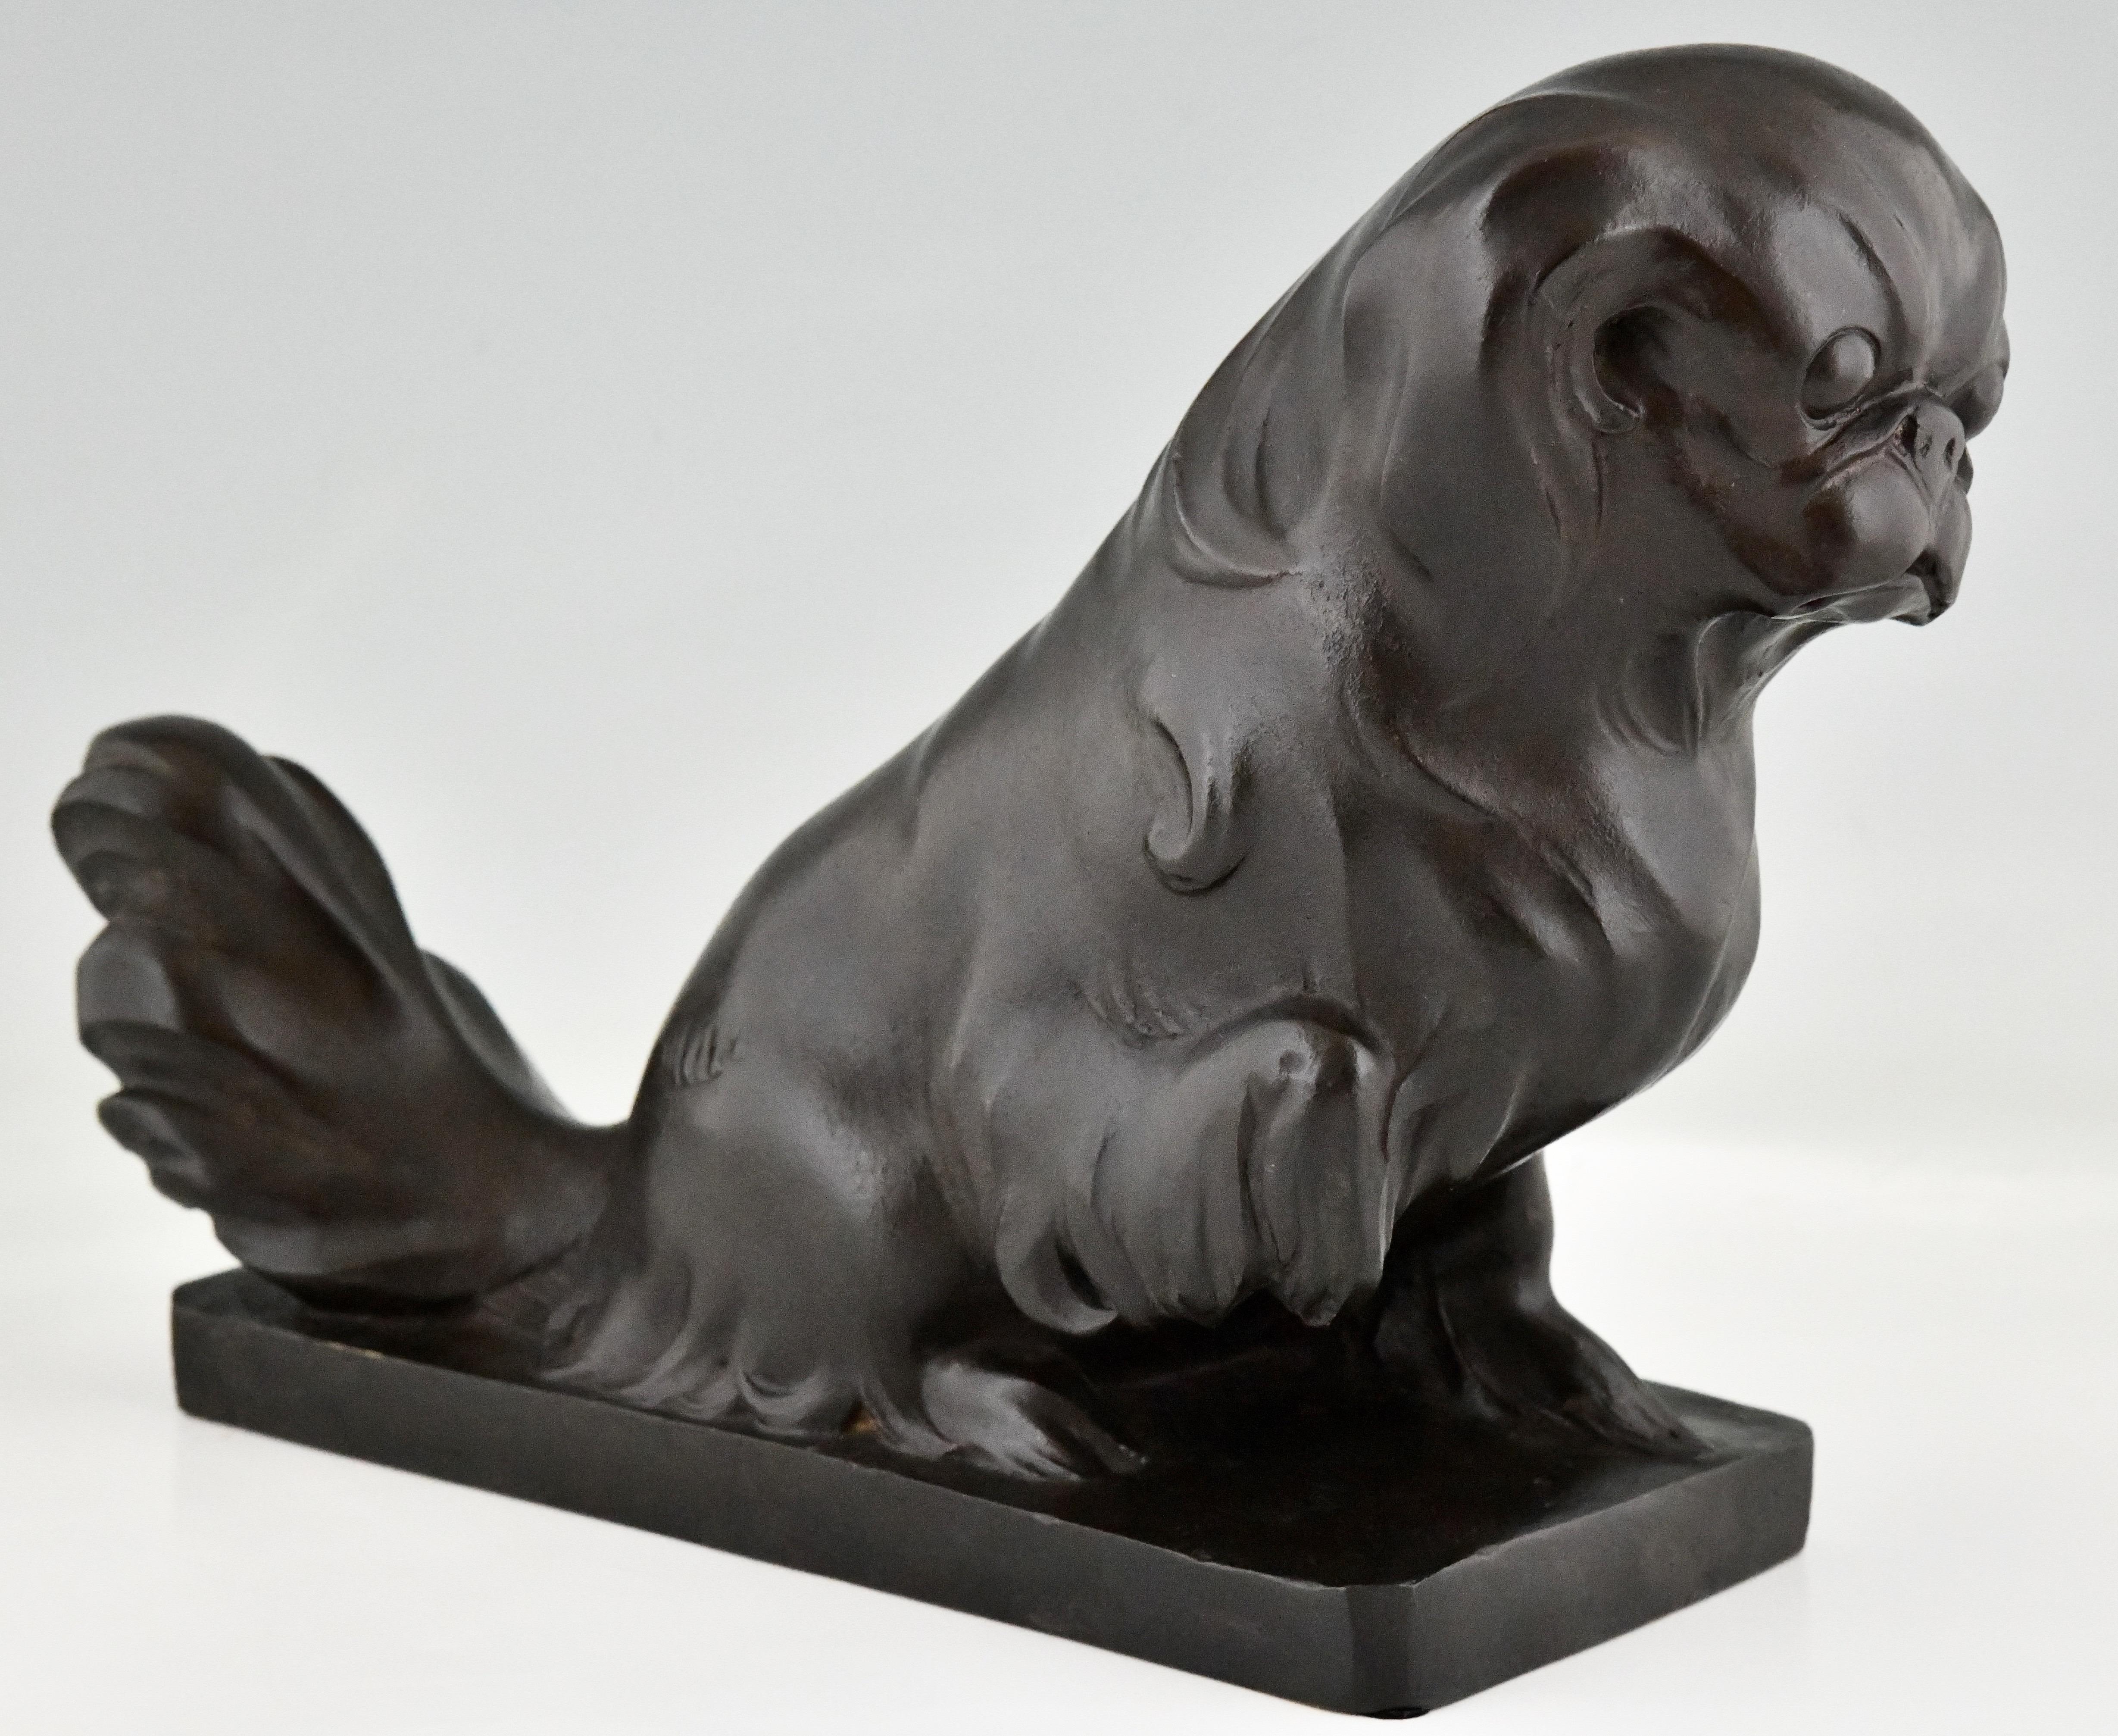 Art Deco bronze sculpture pekingese dog by G.H. Laurent
Signed and marked Tirage limité, numbered 6/10, Cire perdue.
AD Paris. 

Literature:
Art Deco and other figures, Brian Catley. 
Statuettes of the Art Deco Period, Alberto Shayo. 
Animals